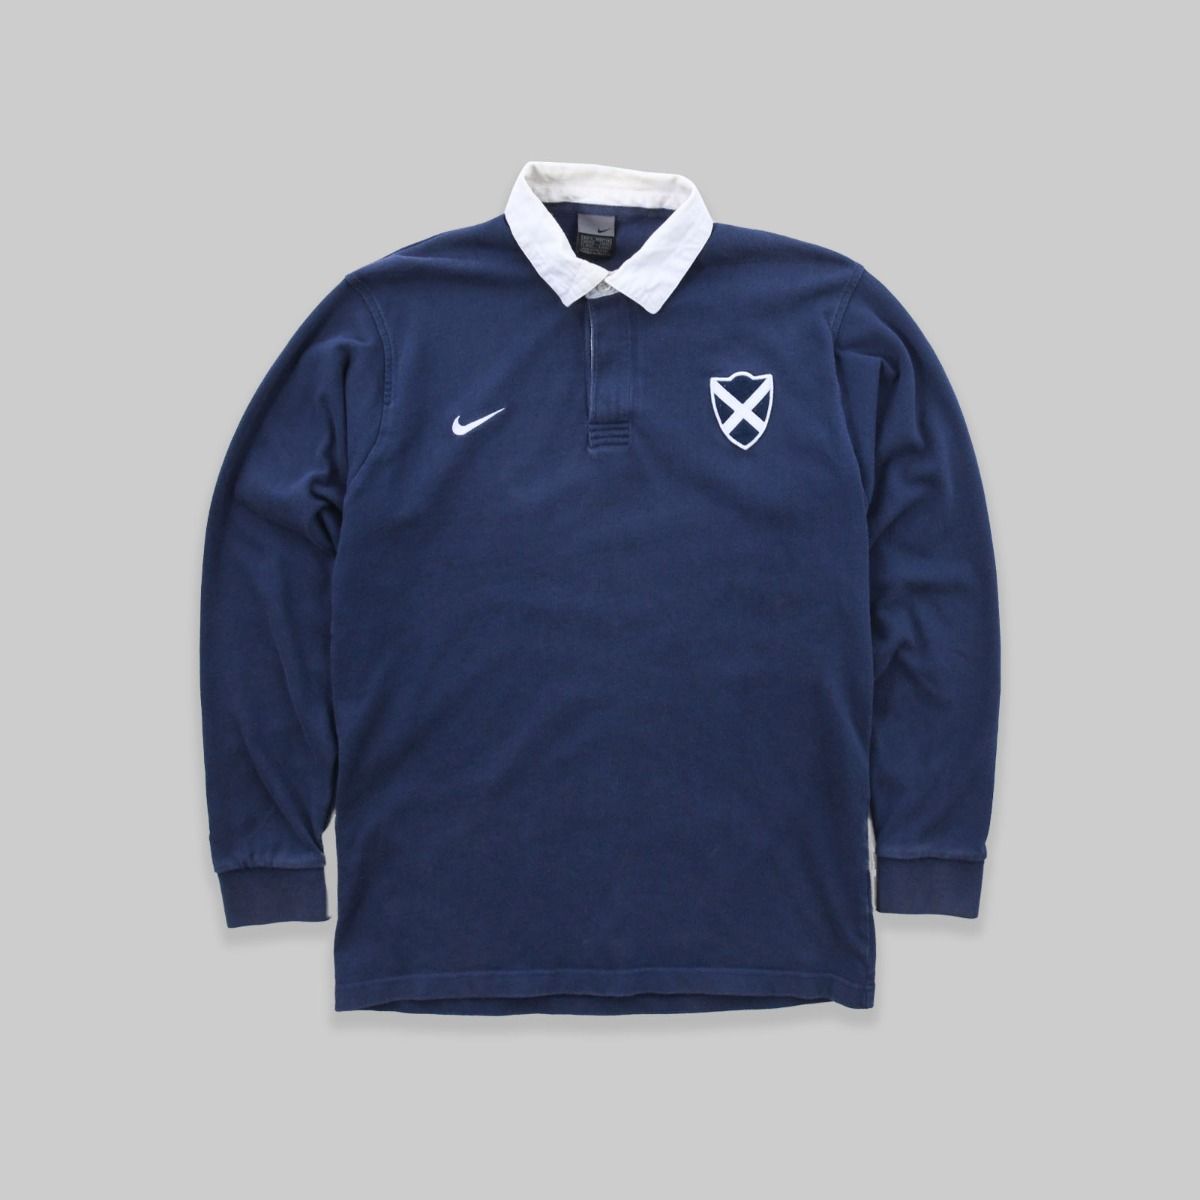 Nike X Scotland Early 2000s Rugby Shirt